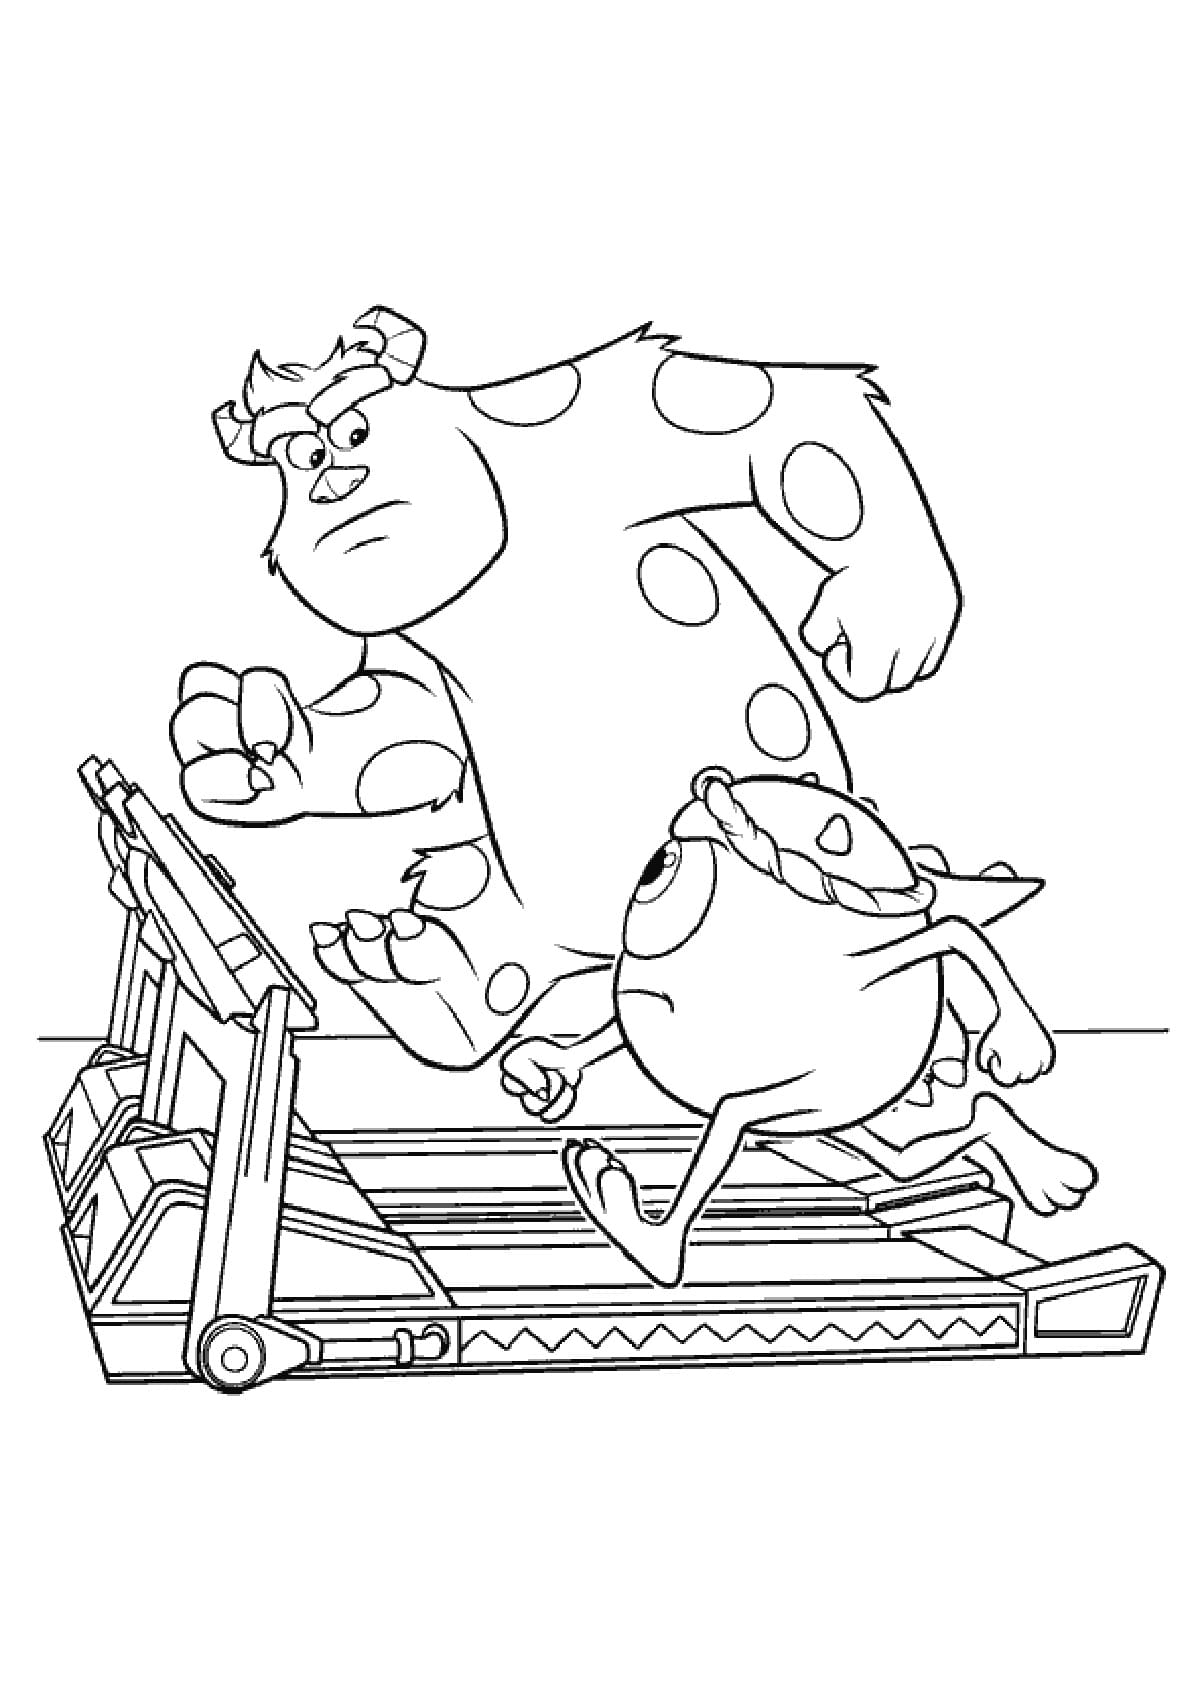 Free Printable Monster Inc Coloring Pages Pdf - Disney Coloring Pages Monsters Inc